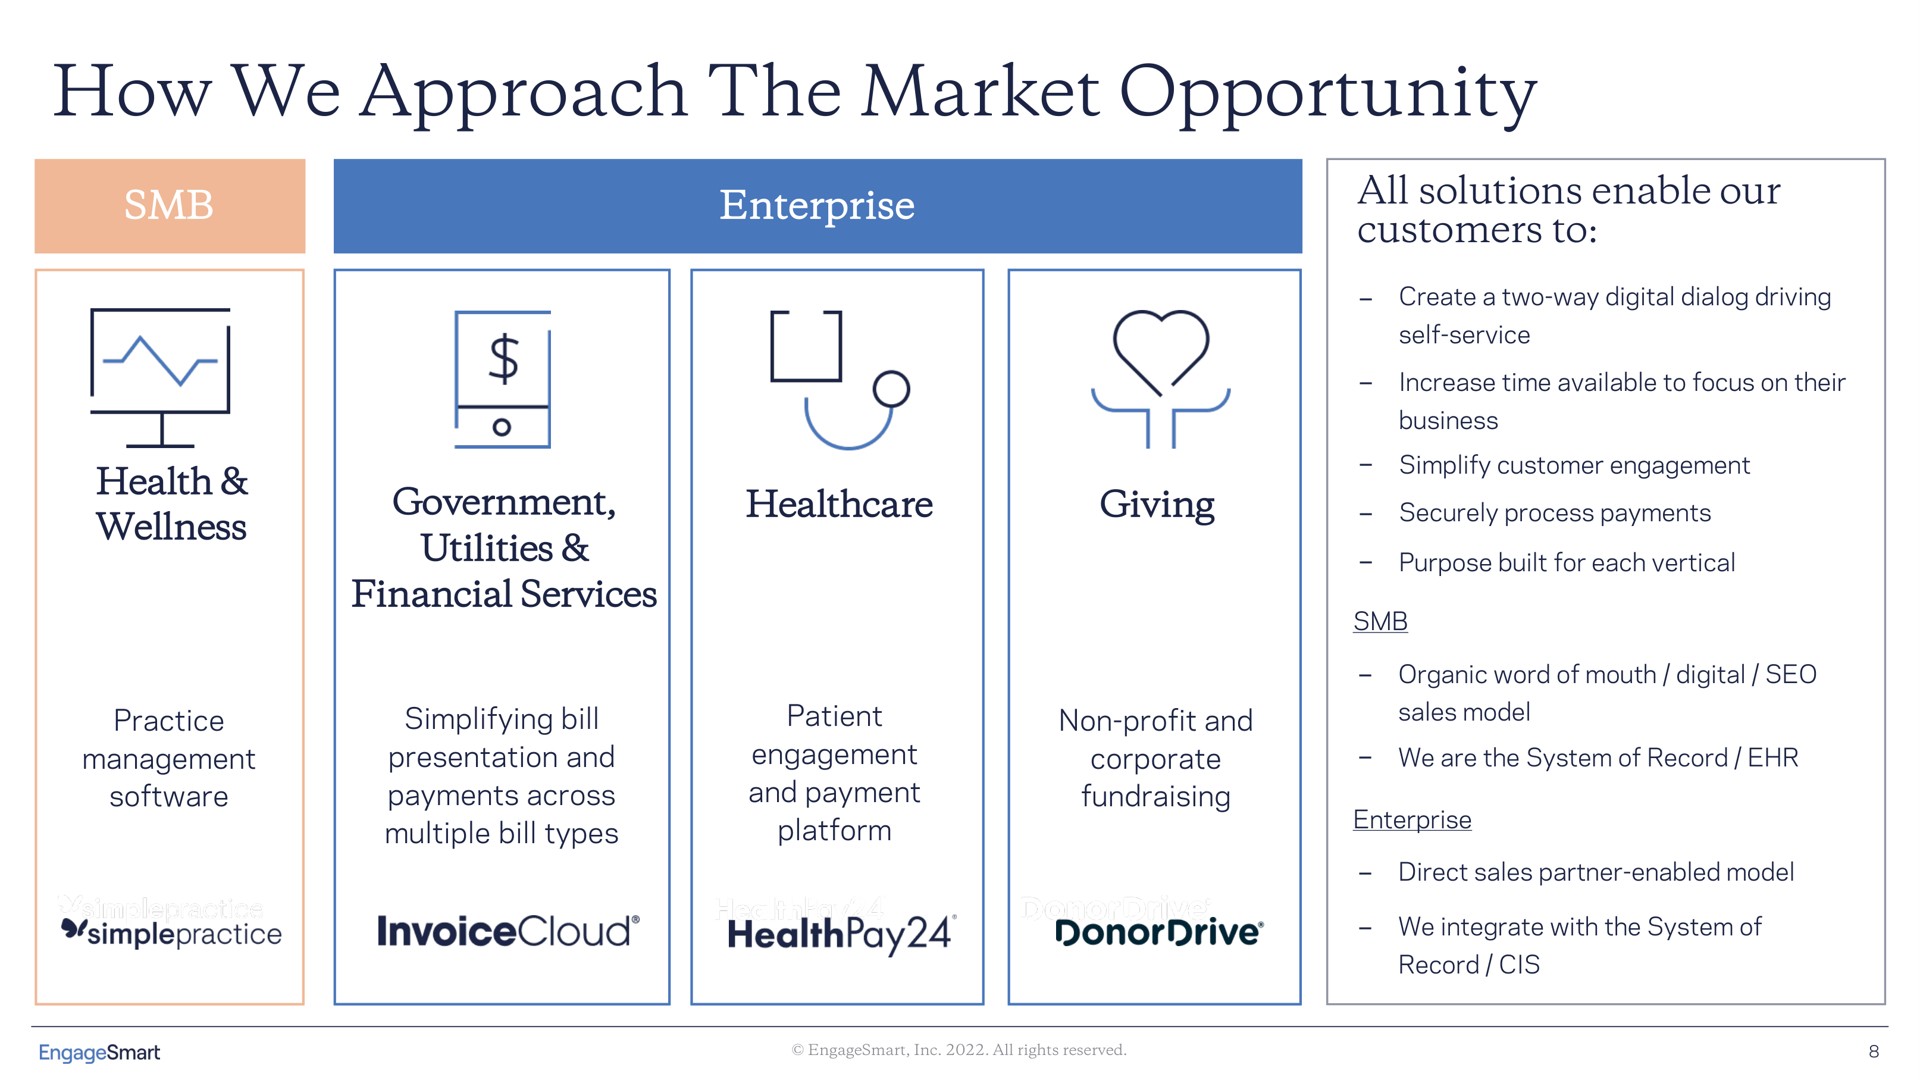 how we approach the market opportunity | EngageSmart